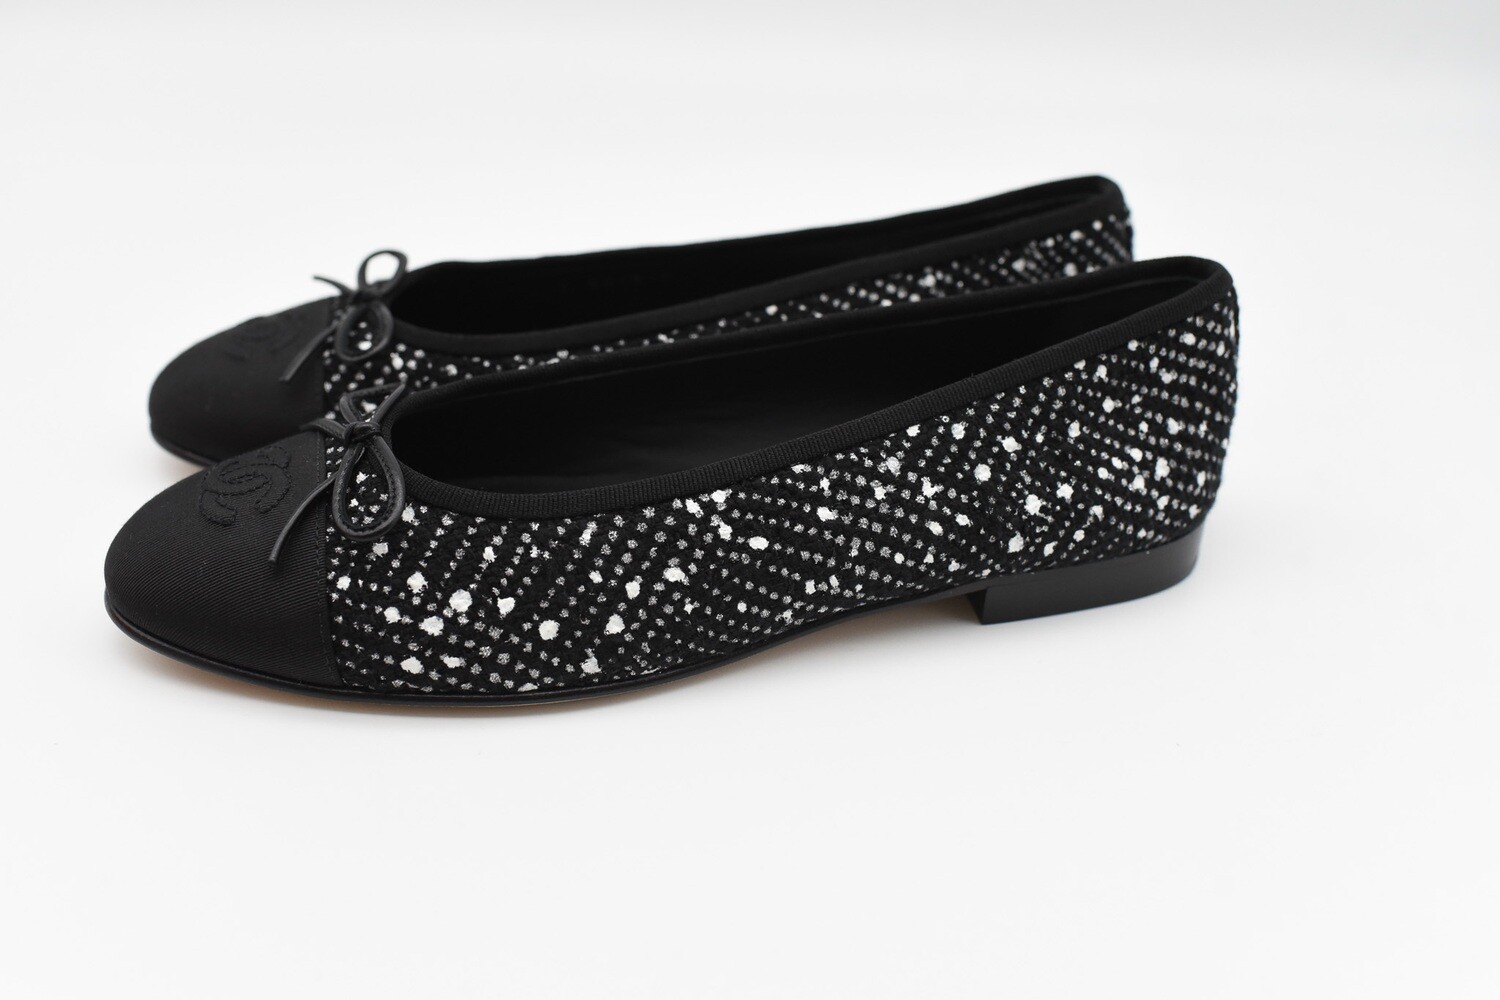 Chanel Shoes Ballet Flats, Black and White Tweed, Size 40, New in Box GA006  - Julia Rose Boston